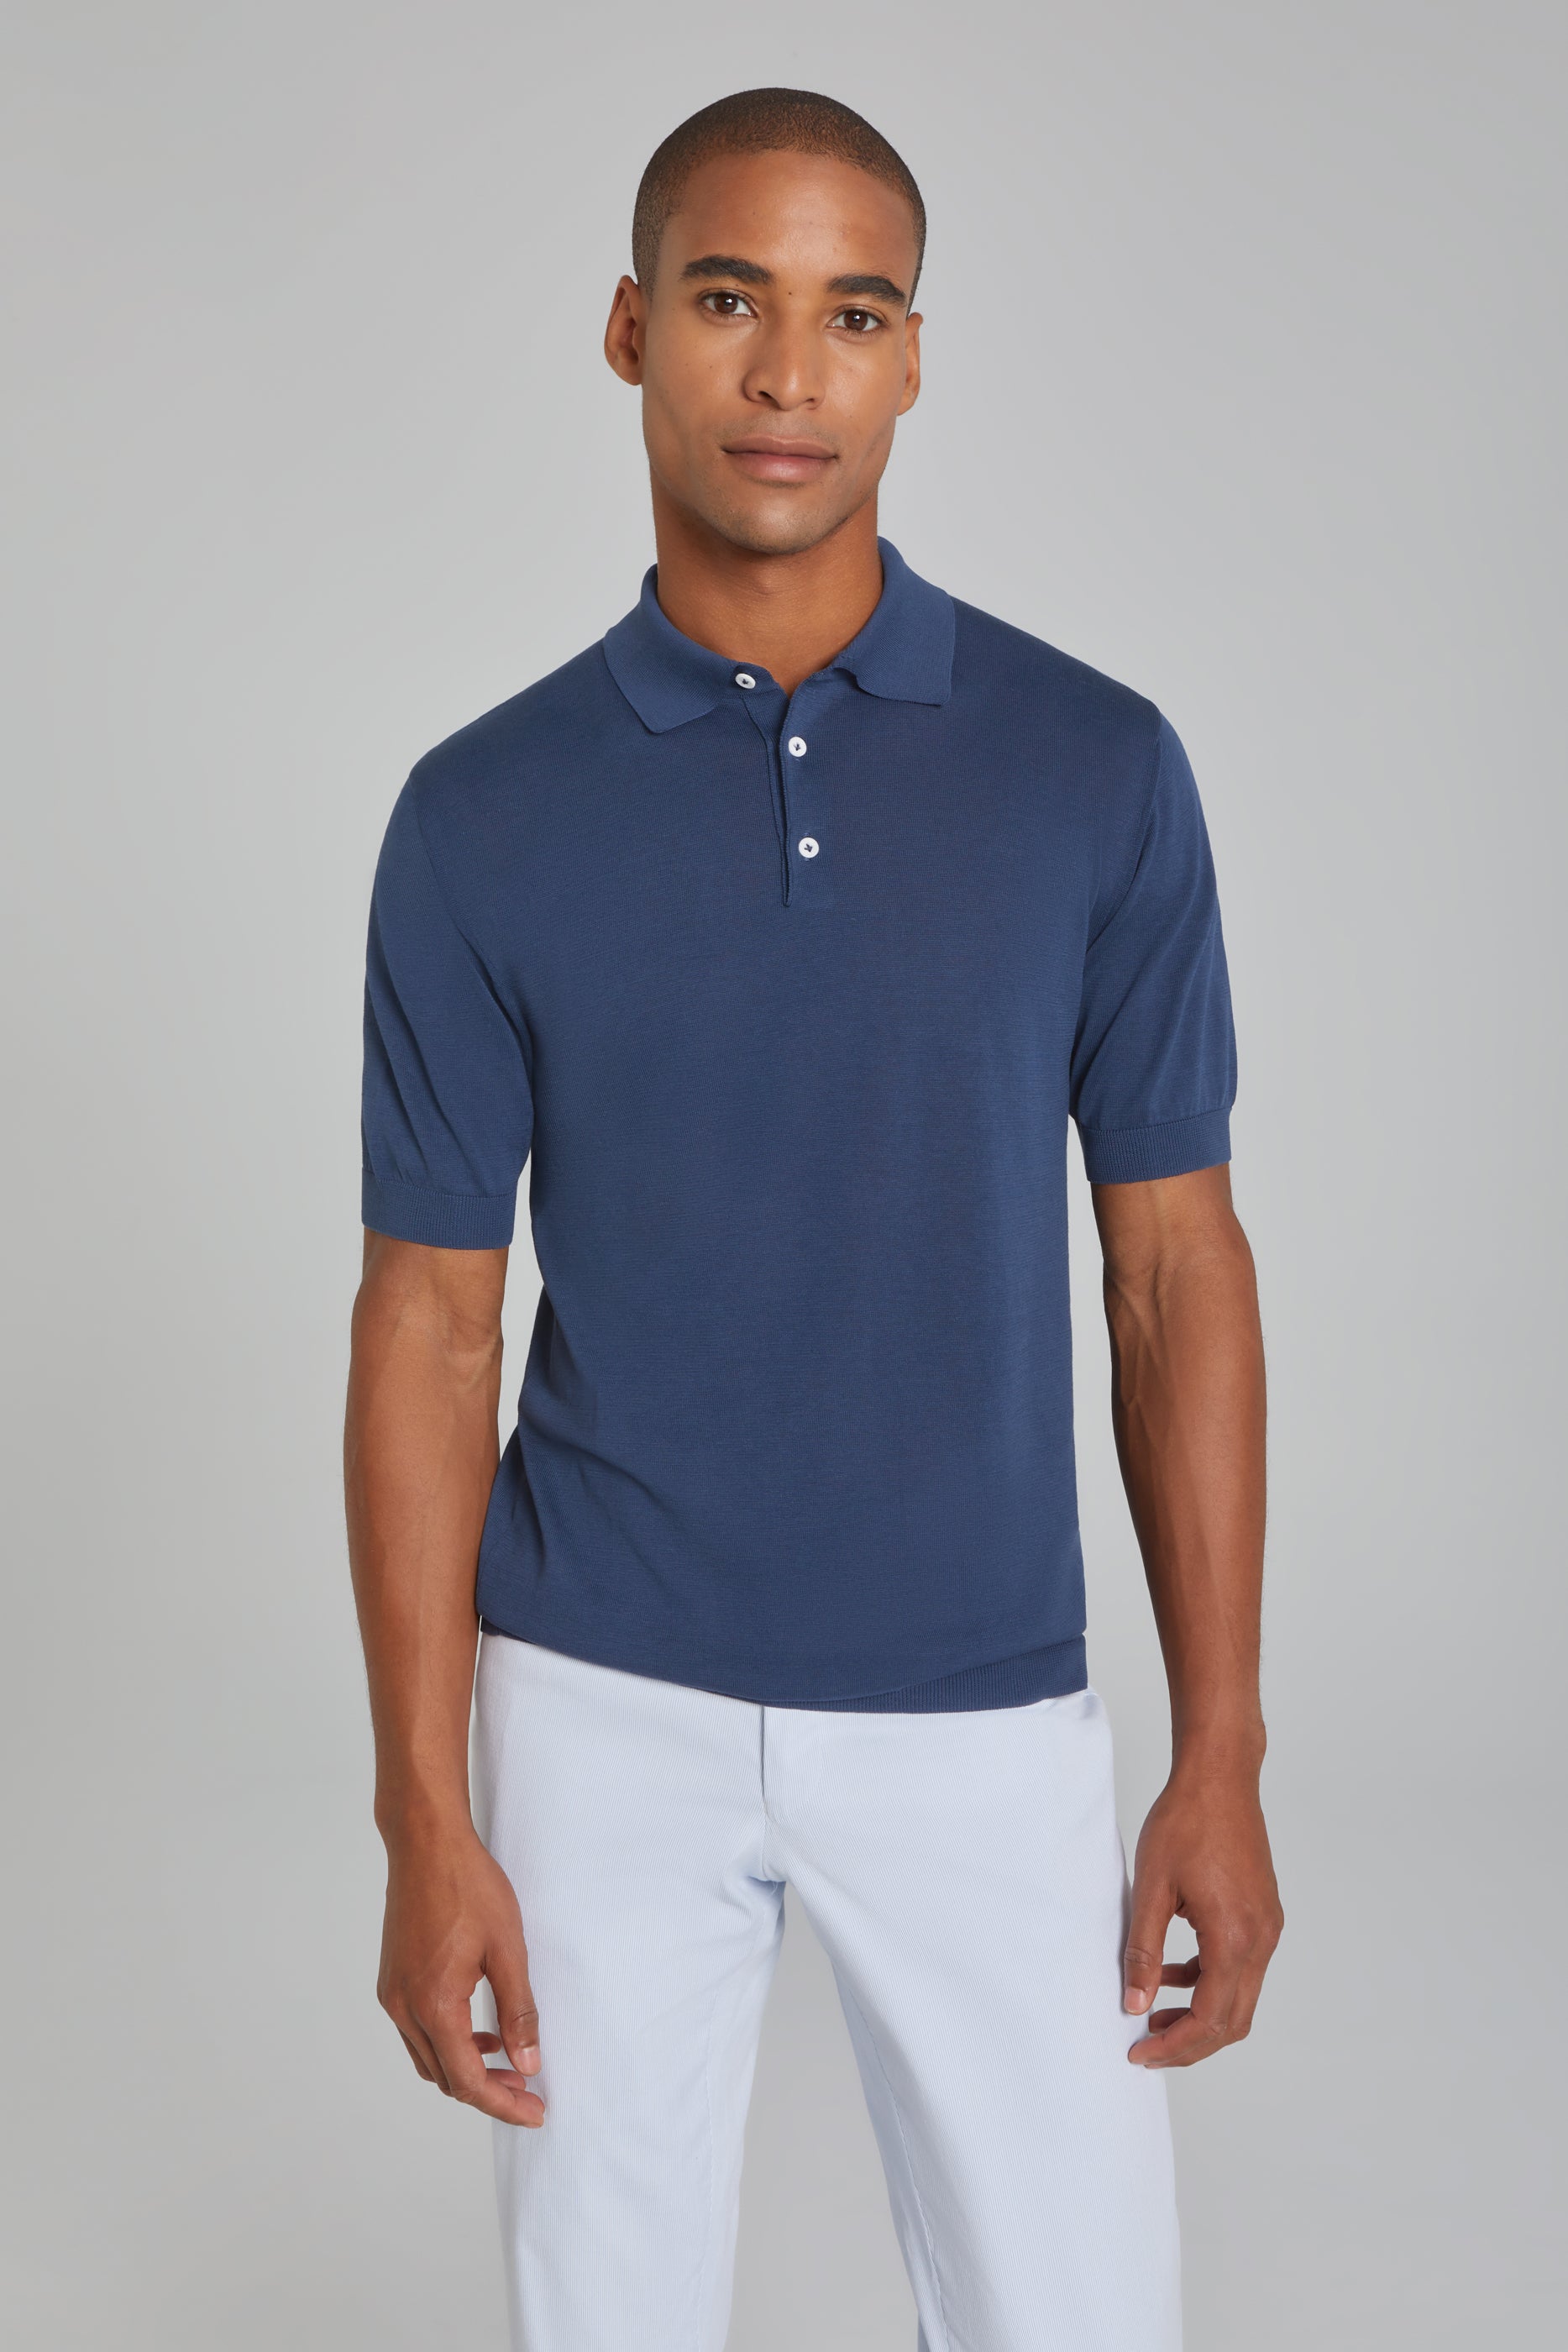 Jack Victor Men's Navy Blue Cotton and Silk SetiCo Knit Polo